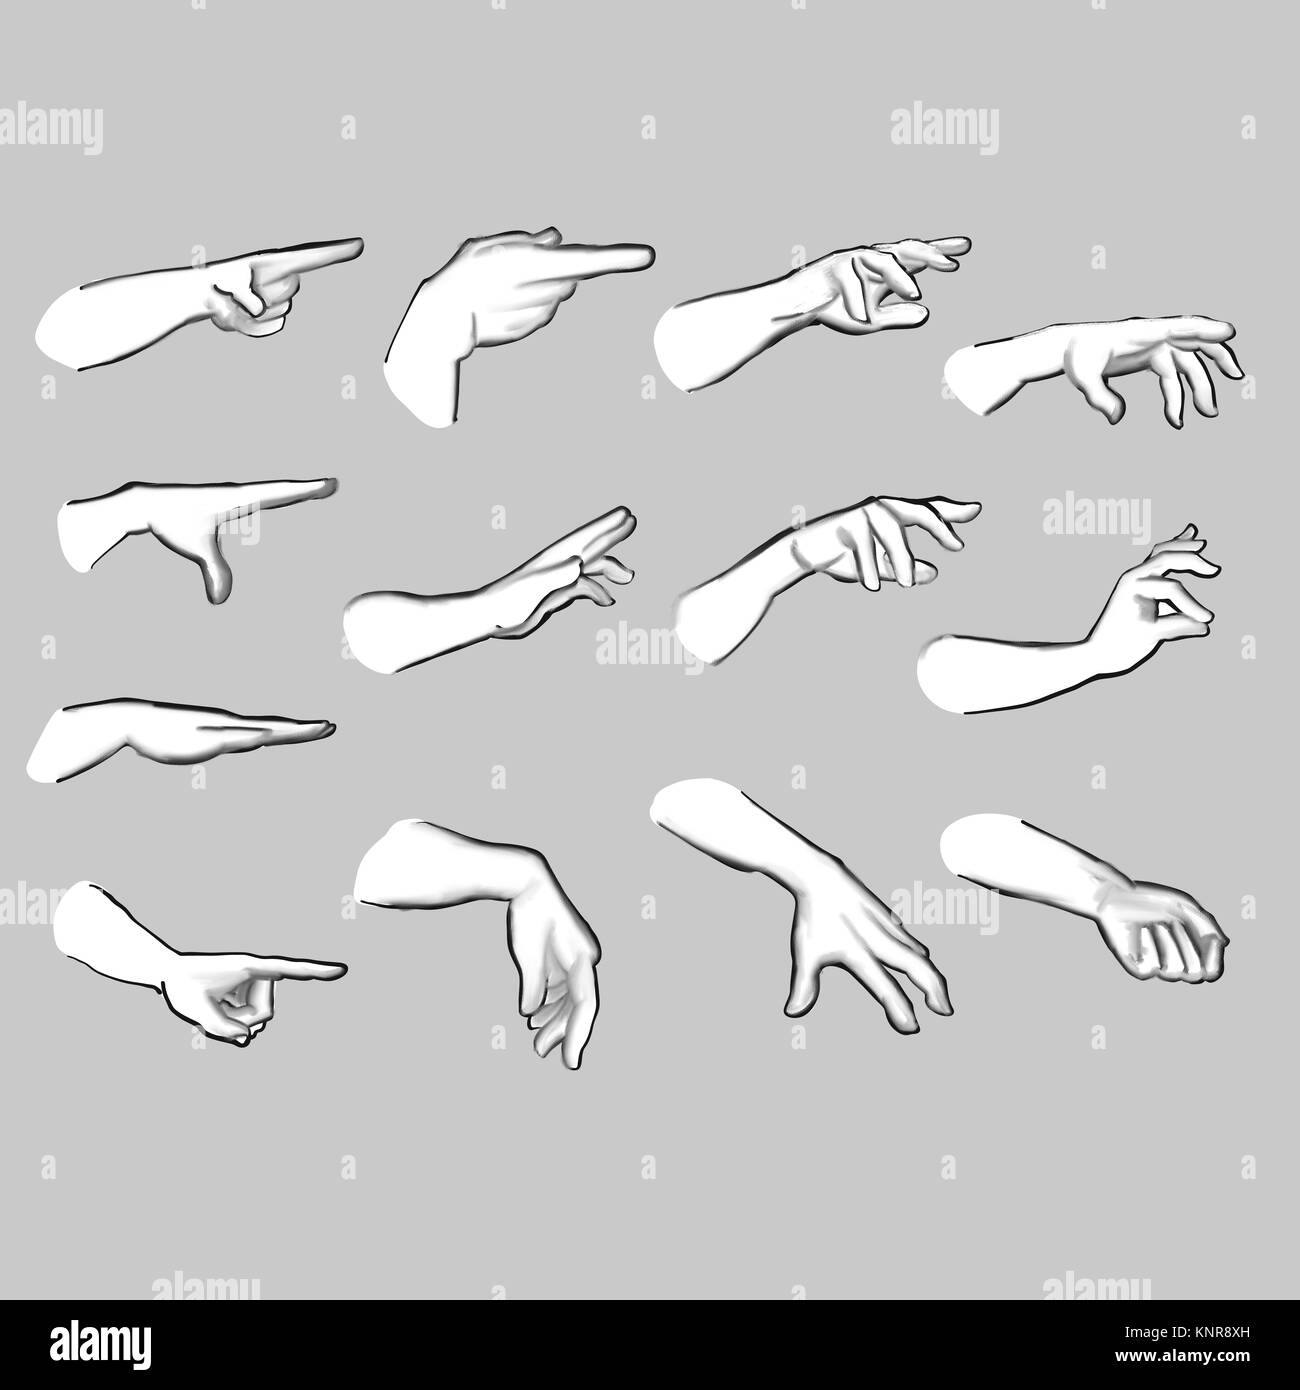 Hand drawing for references XD by 0jamisu on DeviantArt